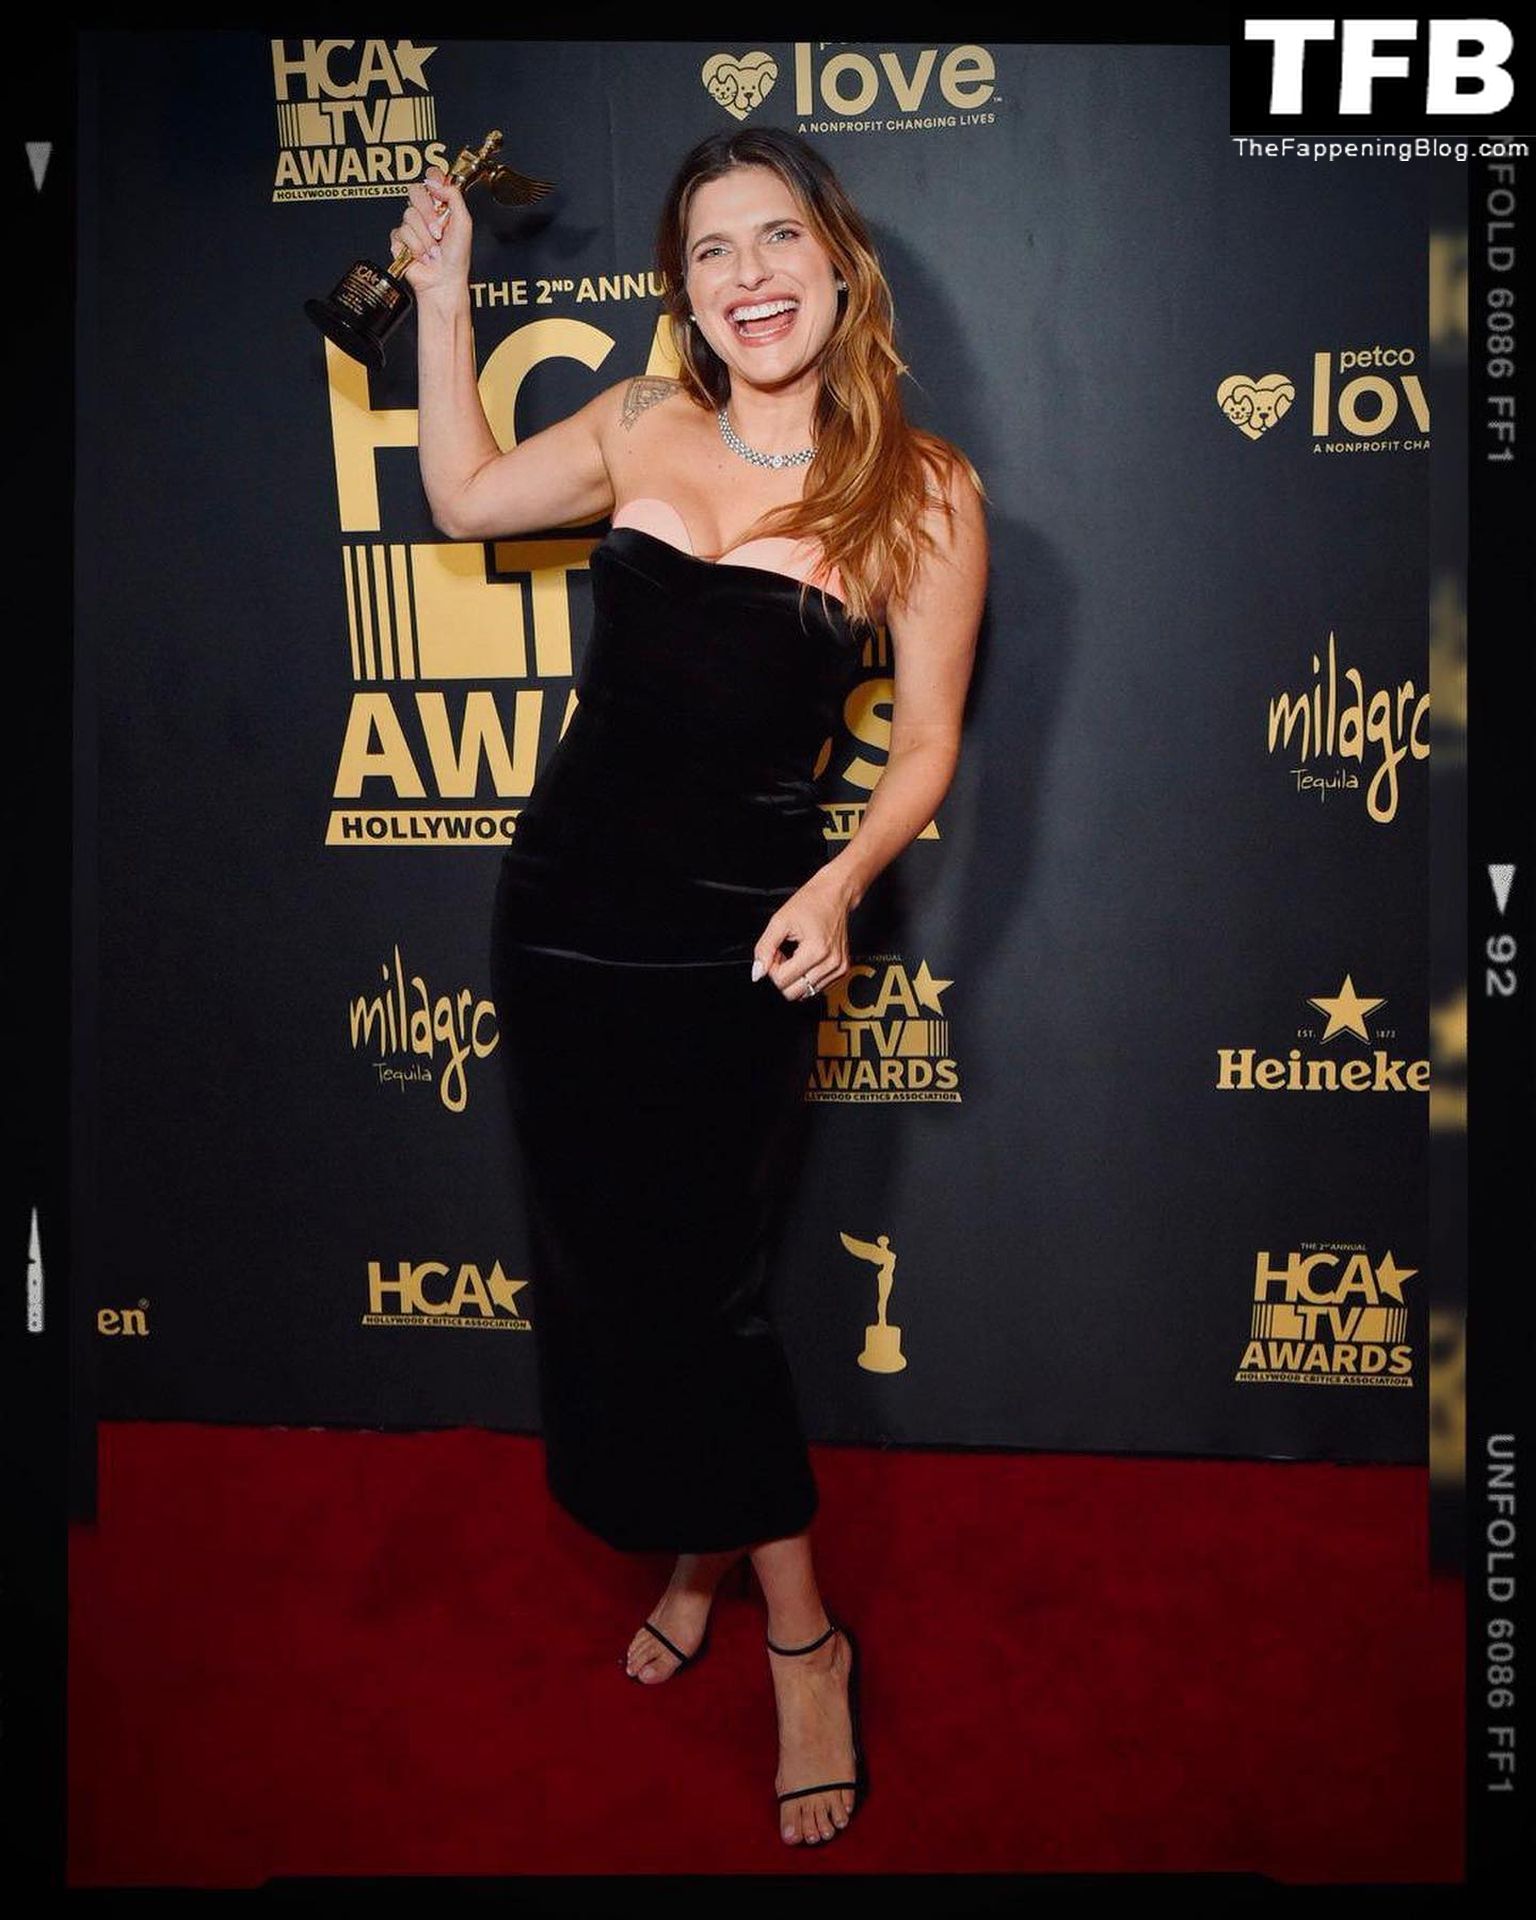 Lake Bell Sexy The Fappening Blog 9 - Lake Bell Poses at the 2nd Annual HCA TV Awards in Beverly Hills (10 Photos)